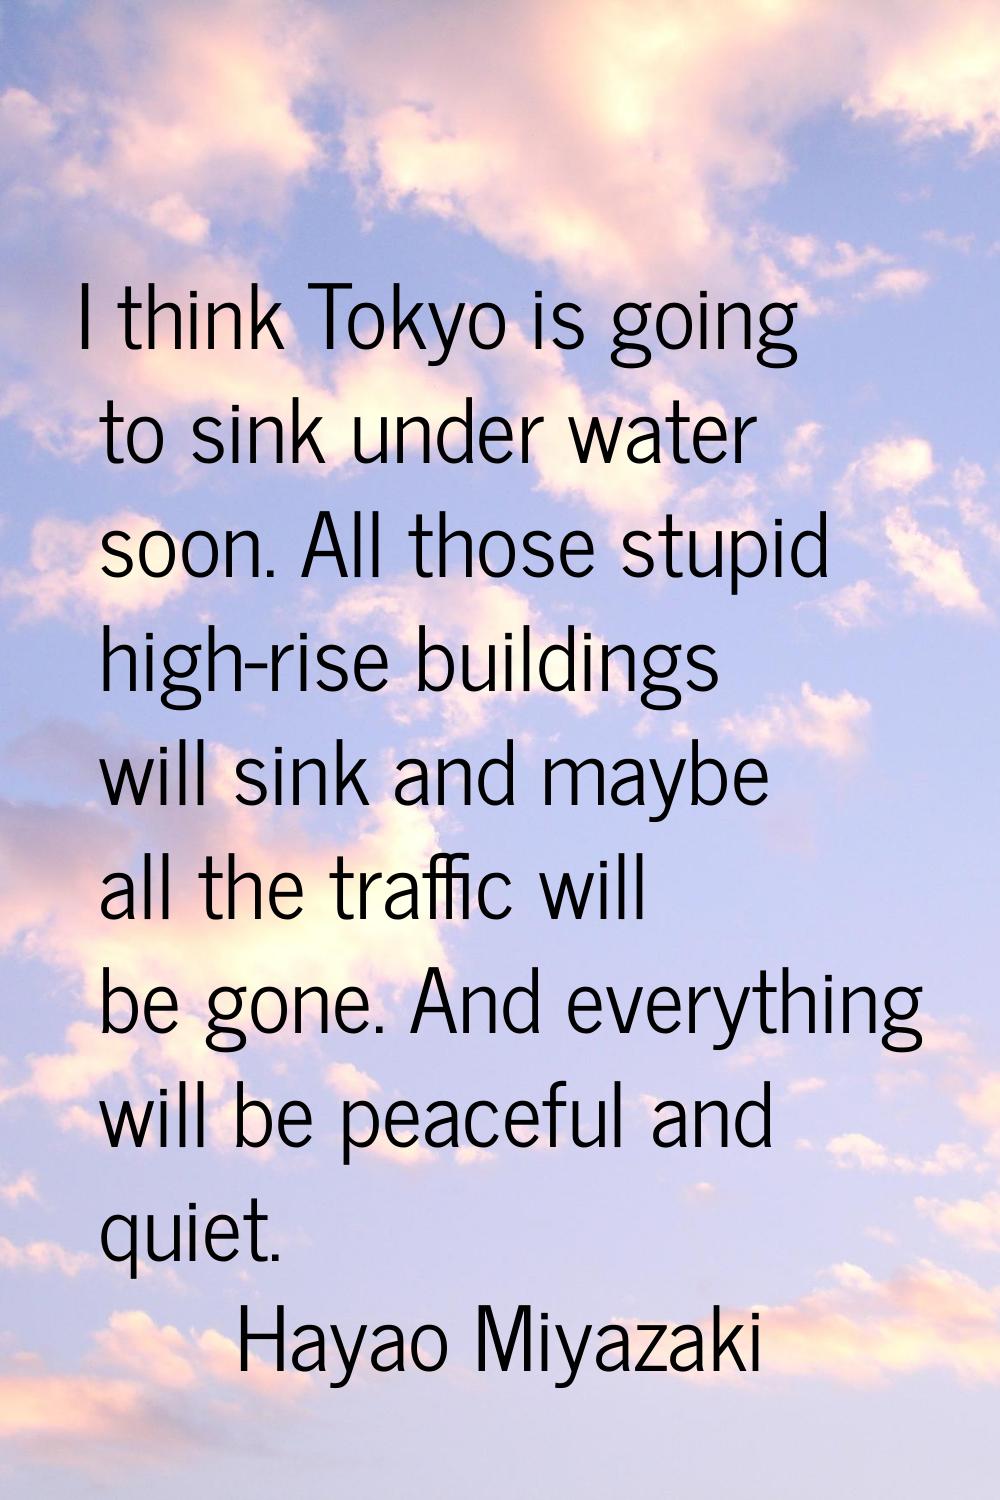 I think Tokyo is going to sink under water soon. All those stupid high-rise buildings will sink and